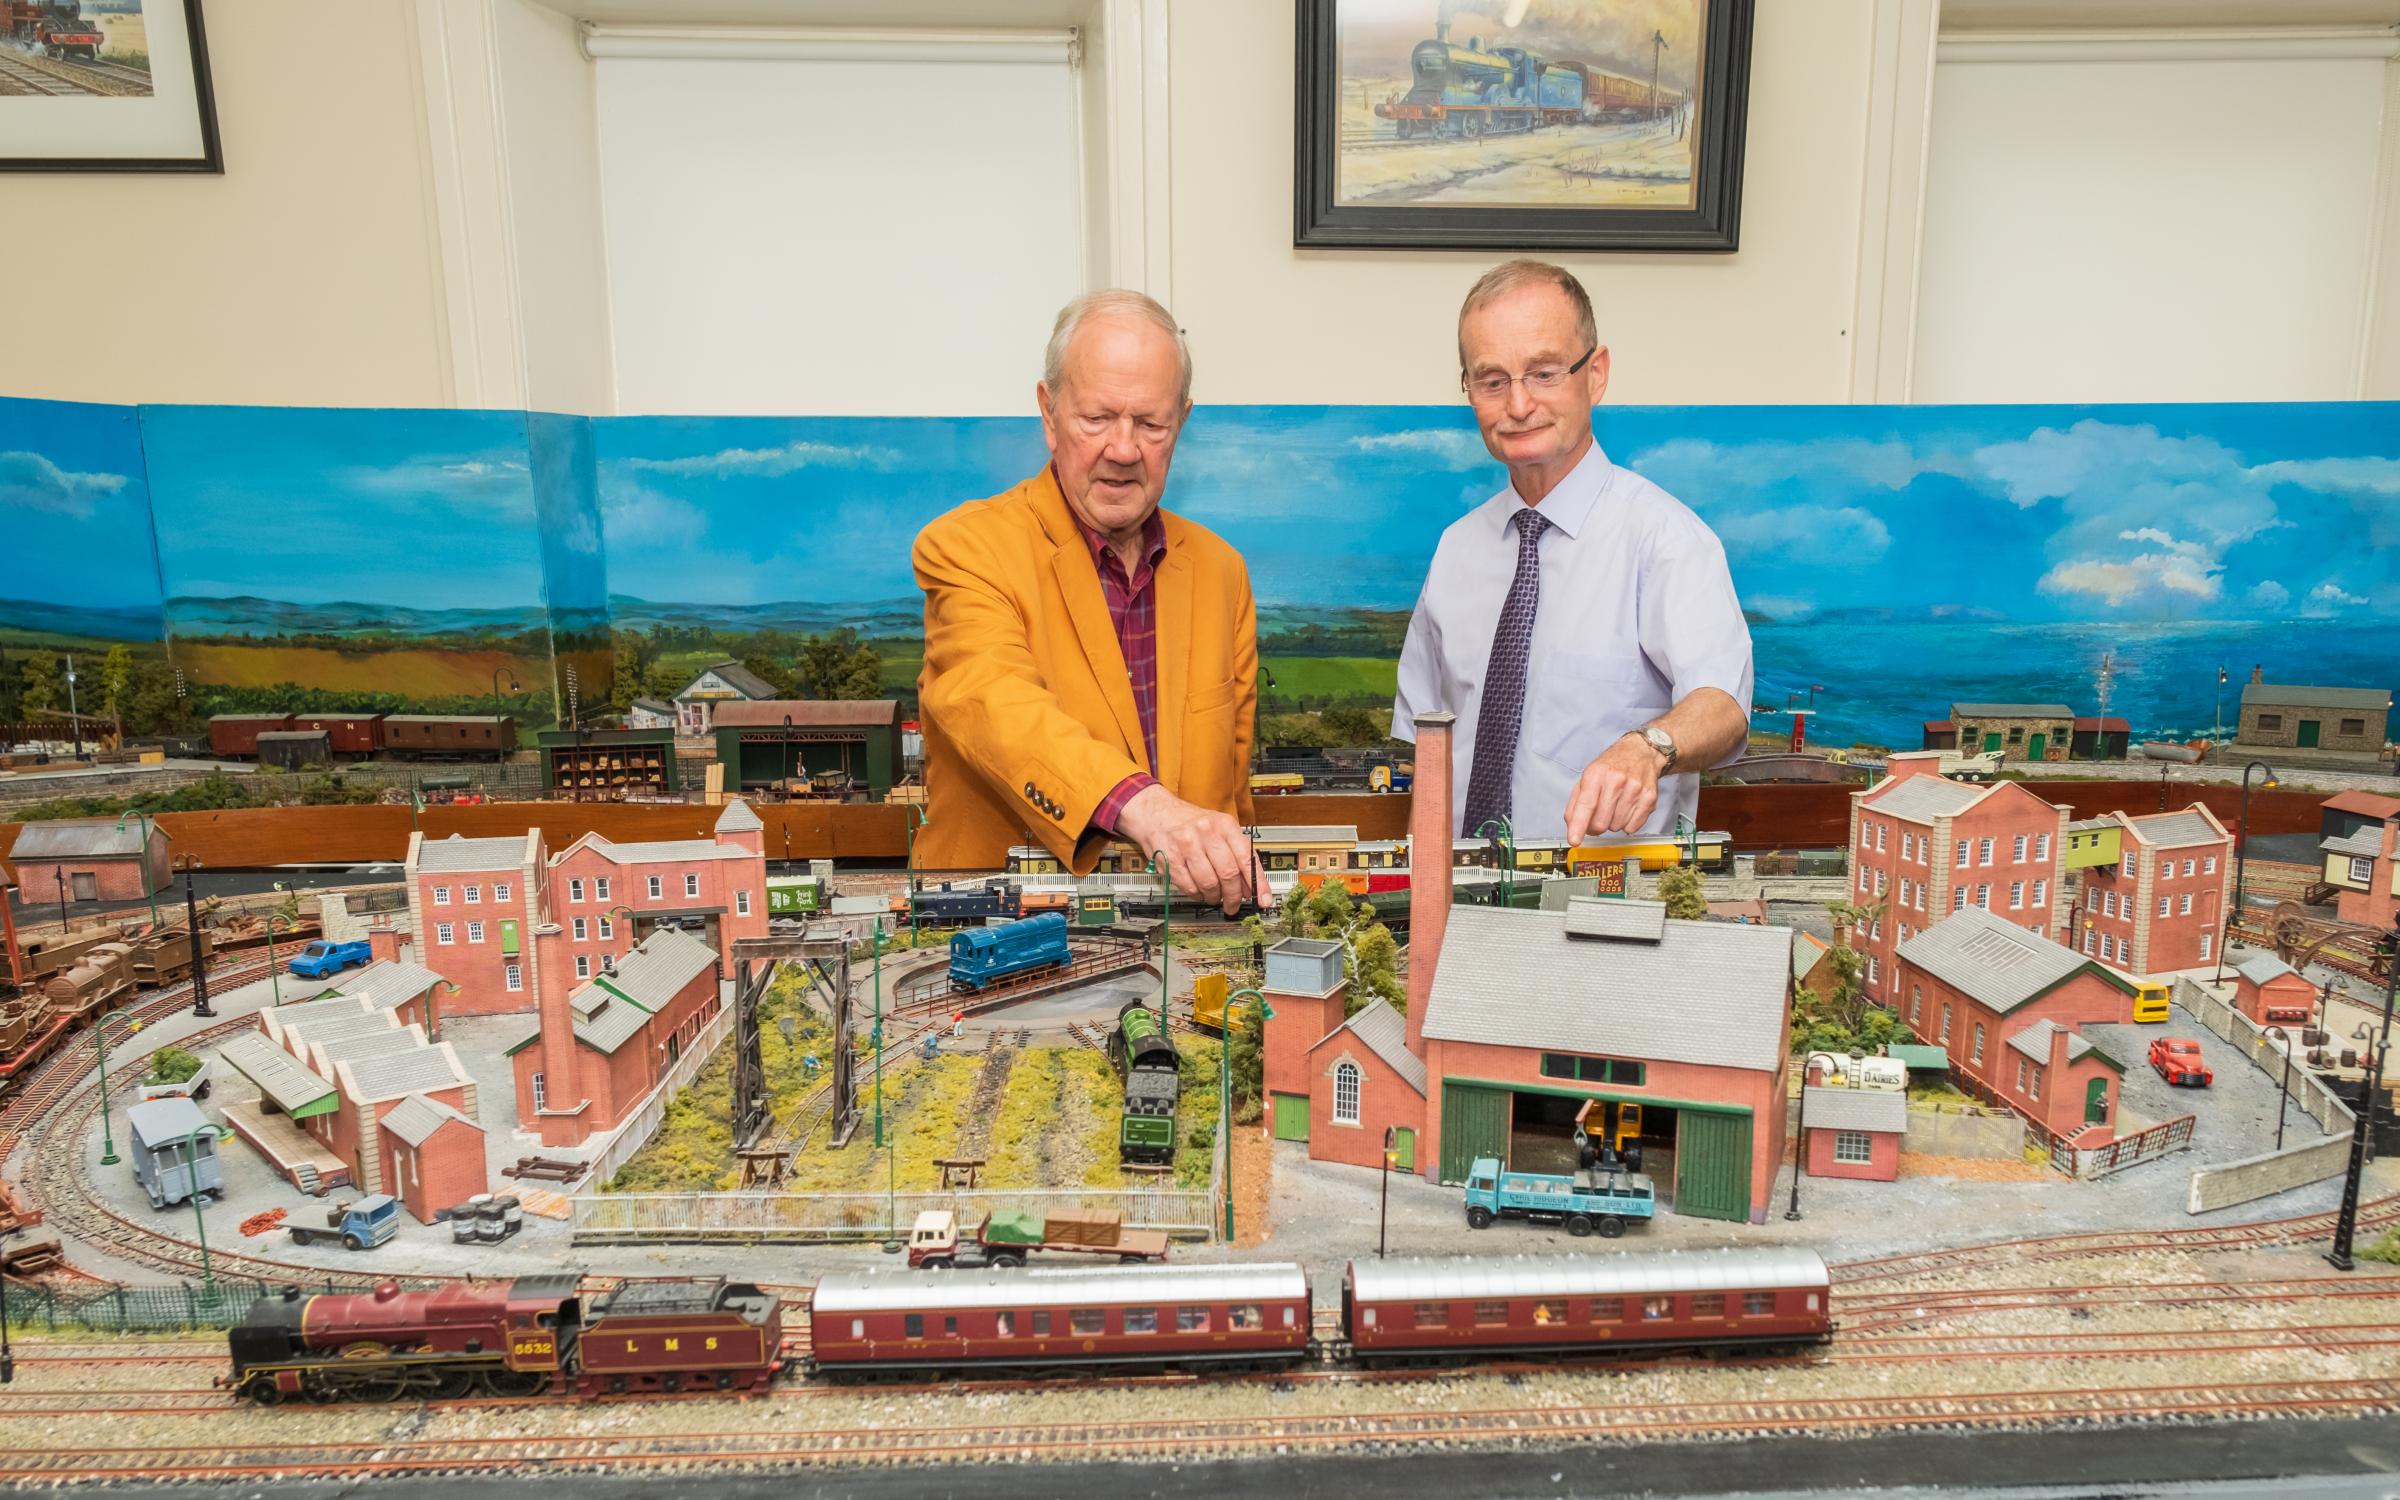 Lord Faulkner admires the model railway layout with Nigel Johnston at Headhunters Railway Museum.